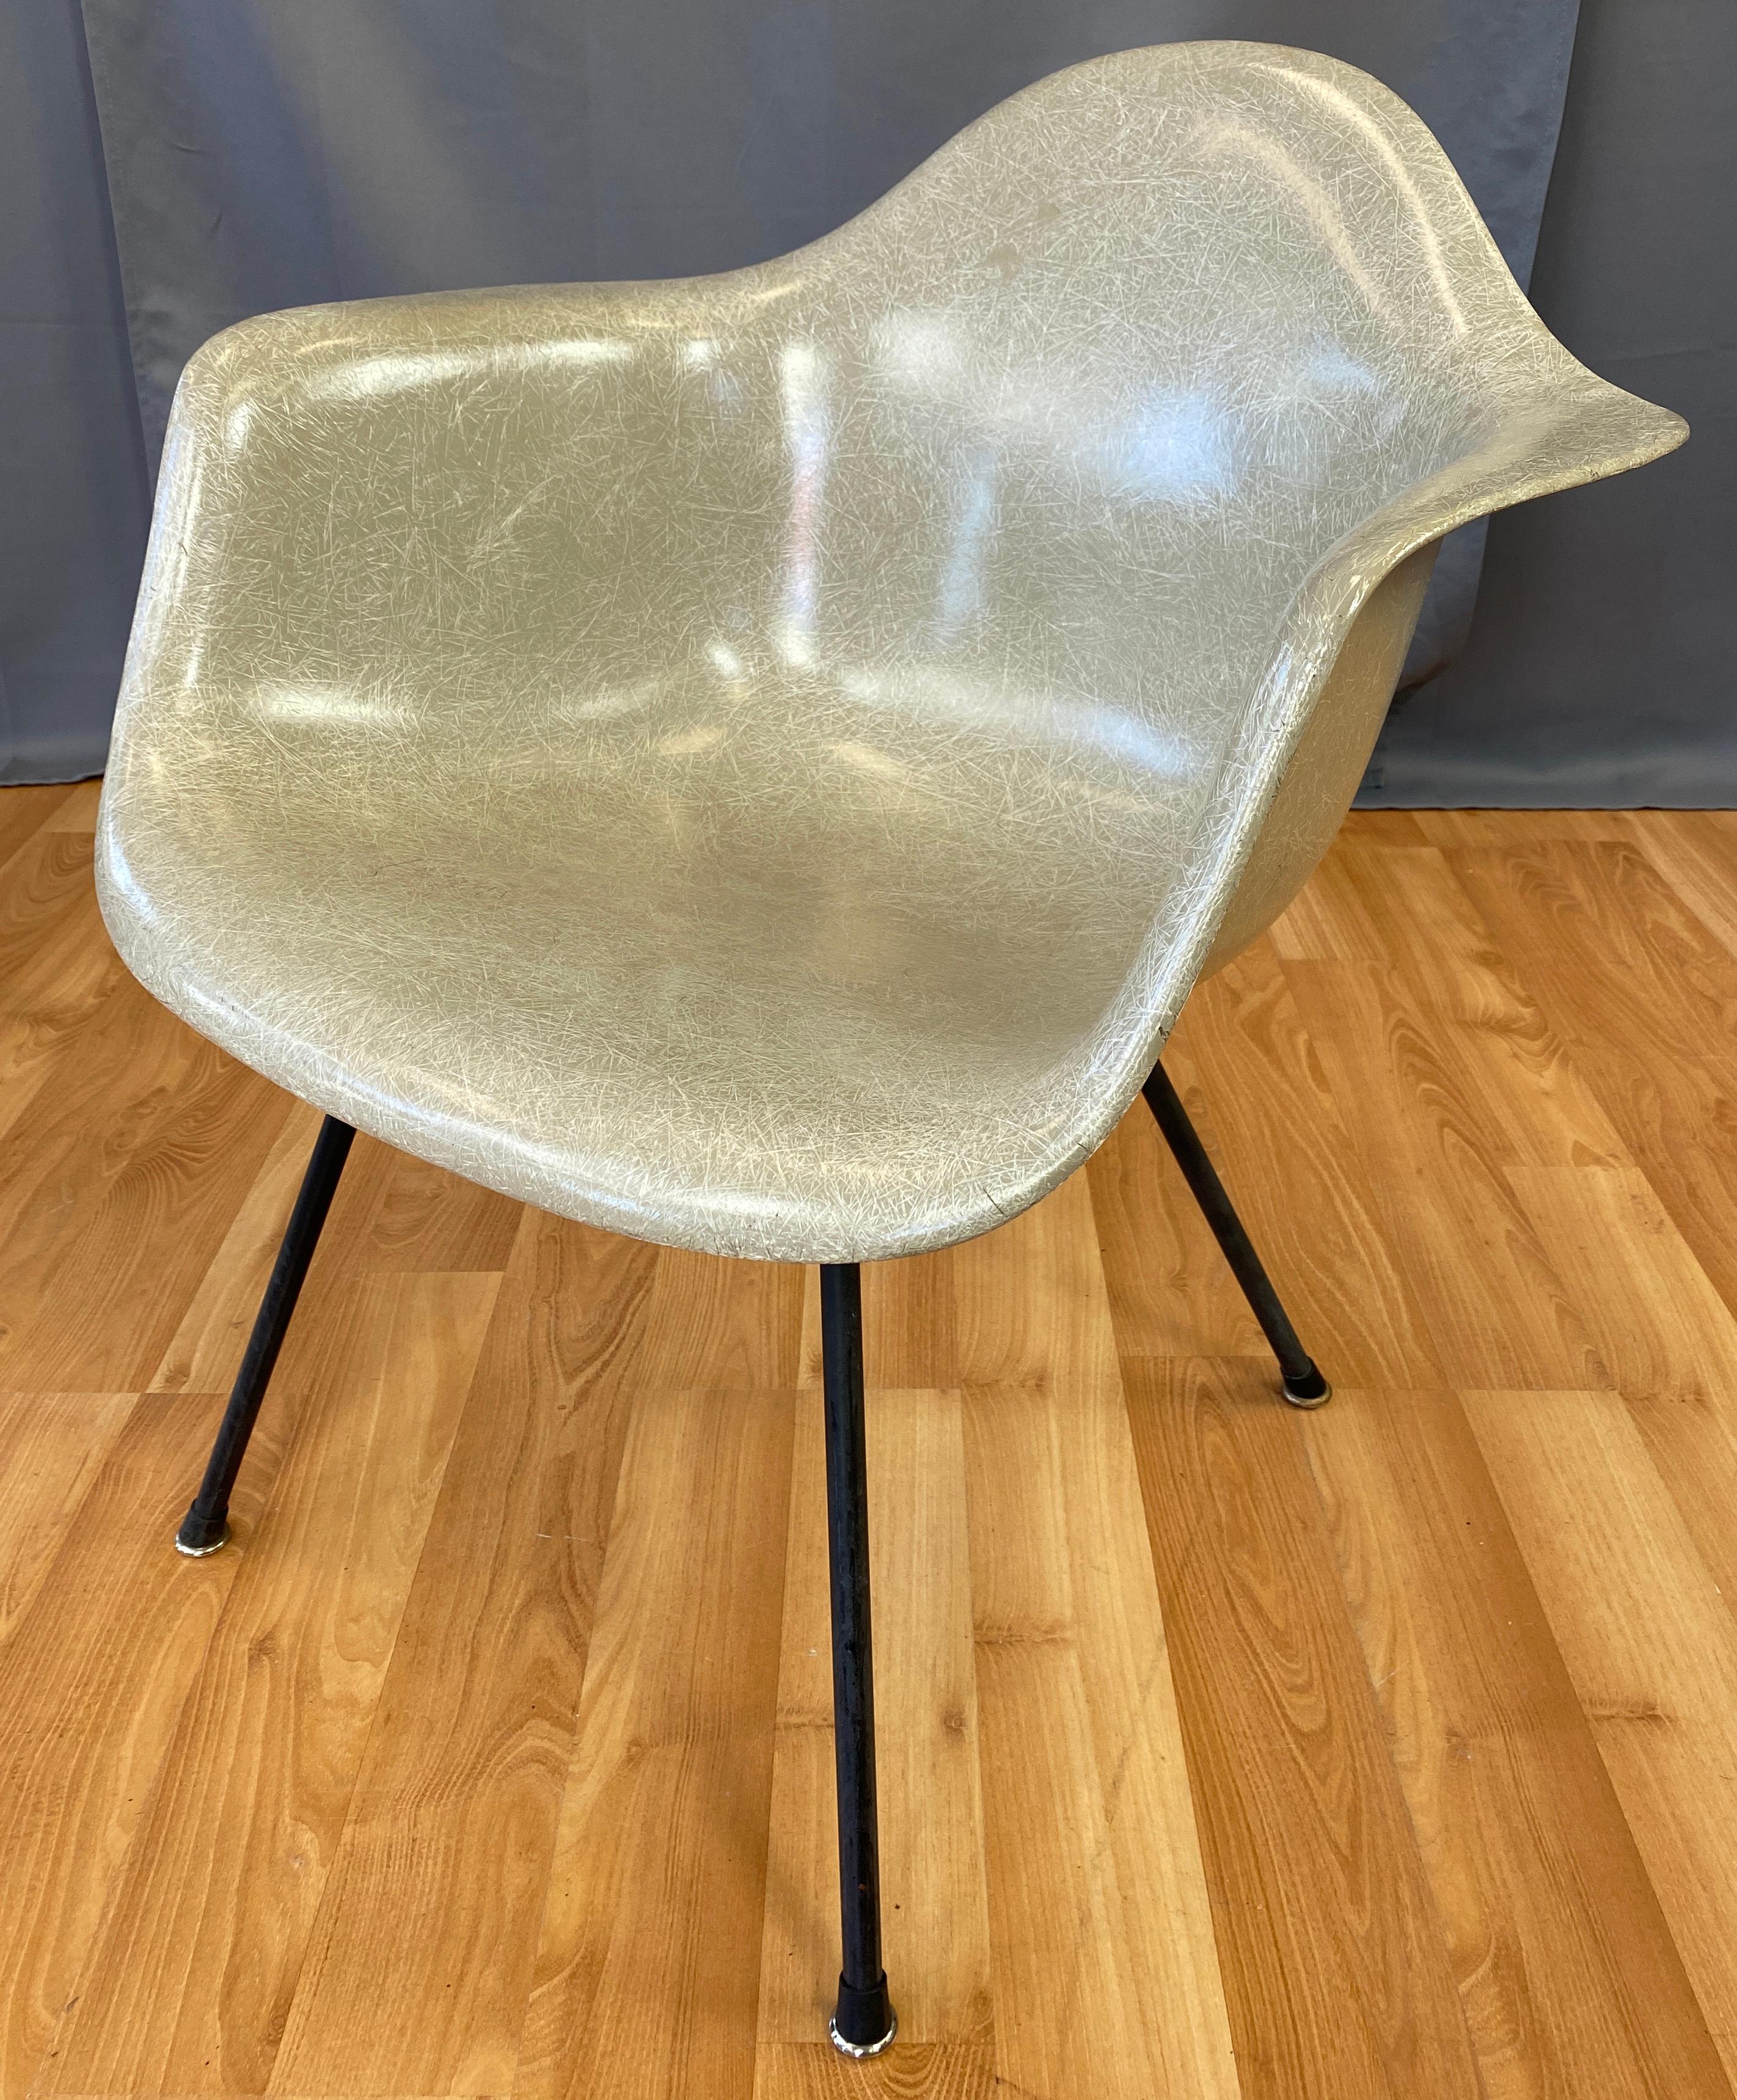 Offered here is an early production of a Charles Eames fiberglass shell arm chair for Herman Miller.
In a beige, with a paper label produced between 1954 and 1955, last line it would say 